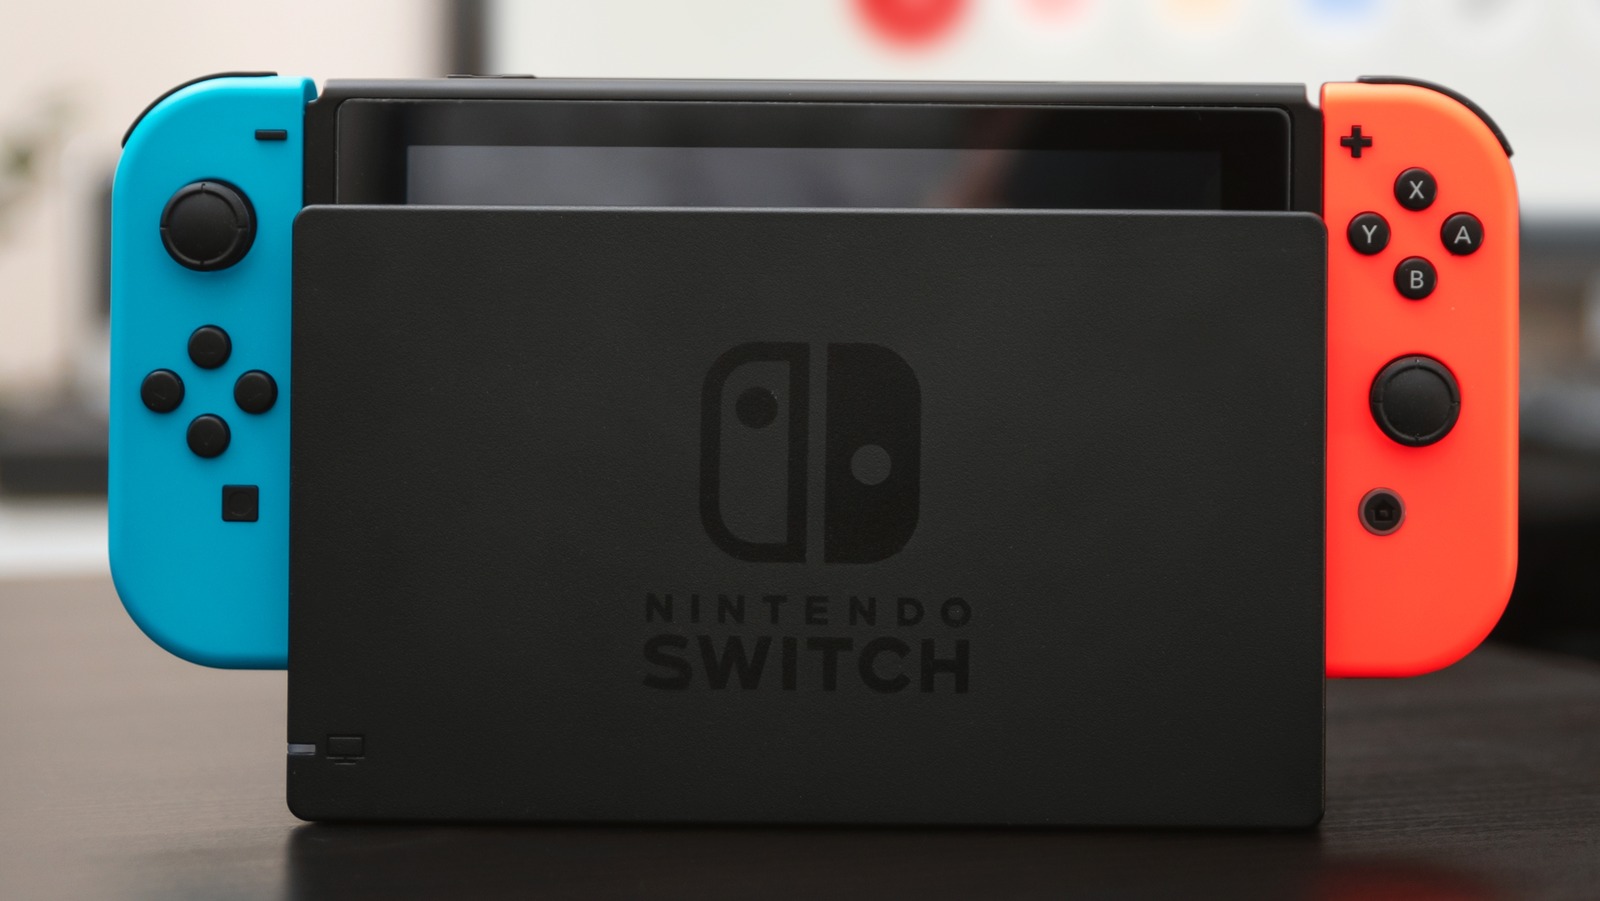 Nintendo Switch consoles include a free $59.99 game at Best Buy